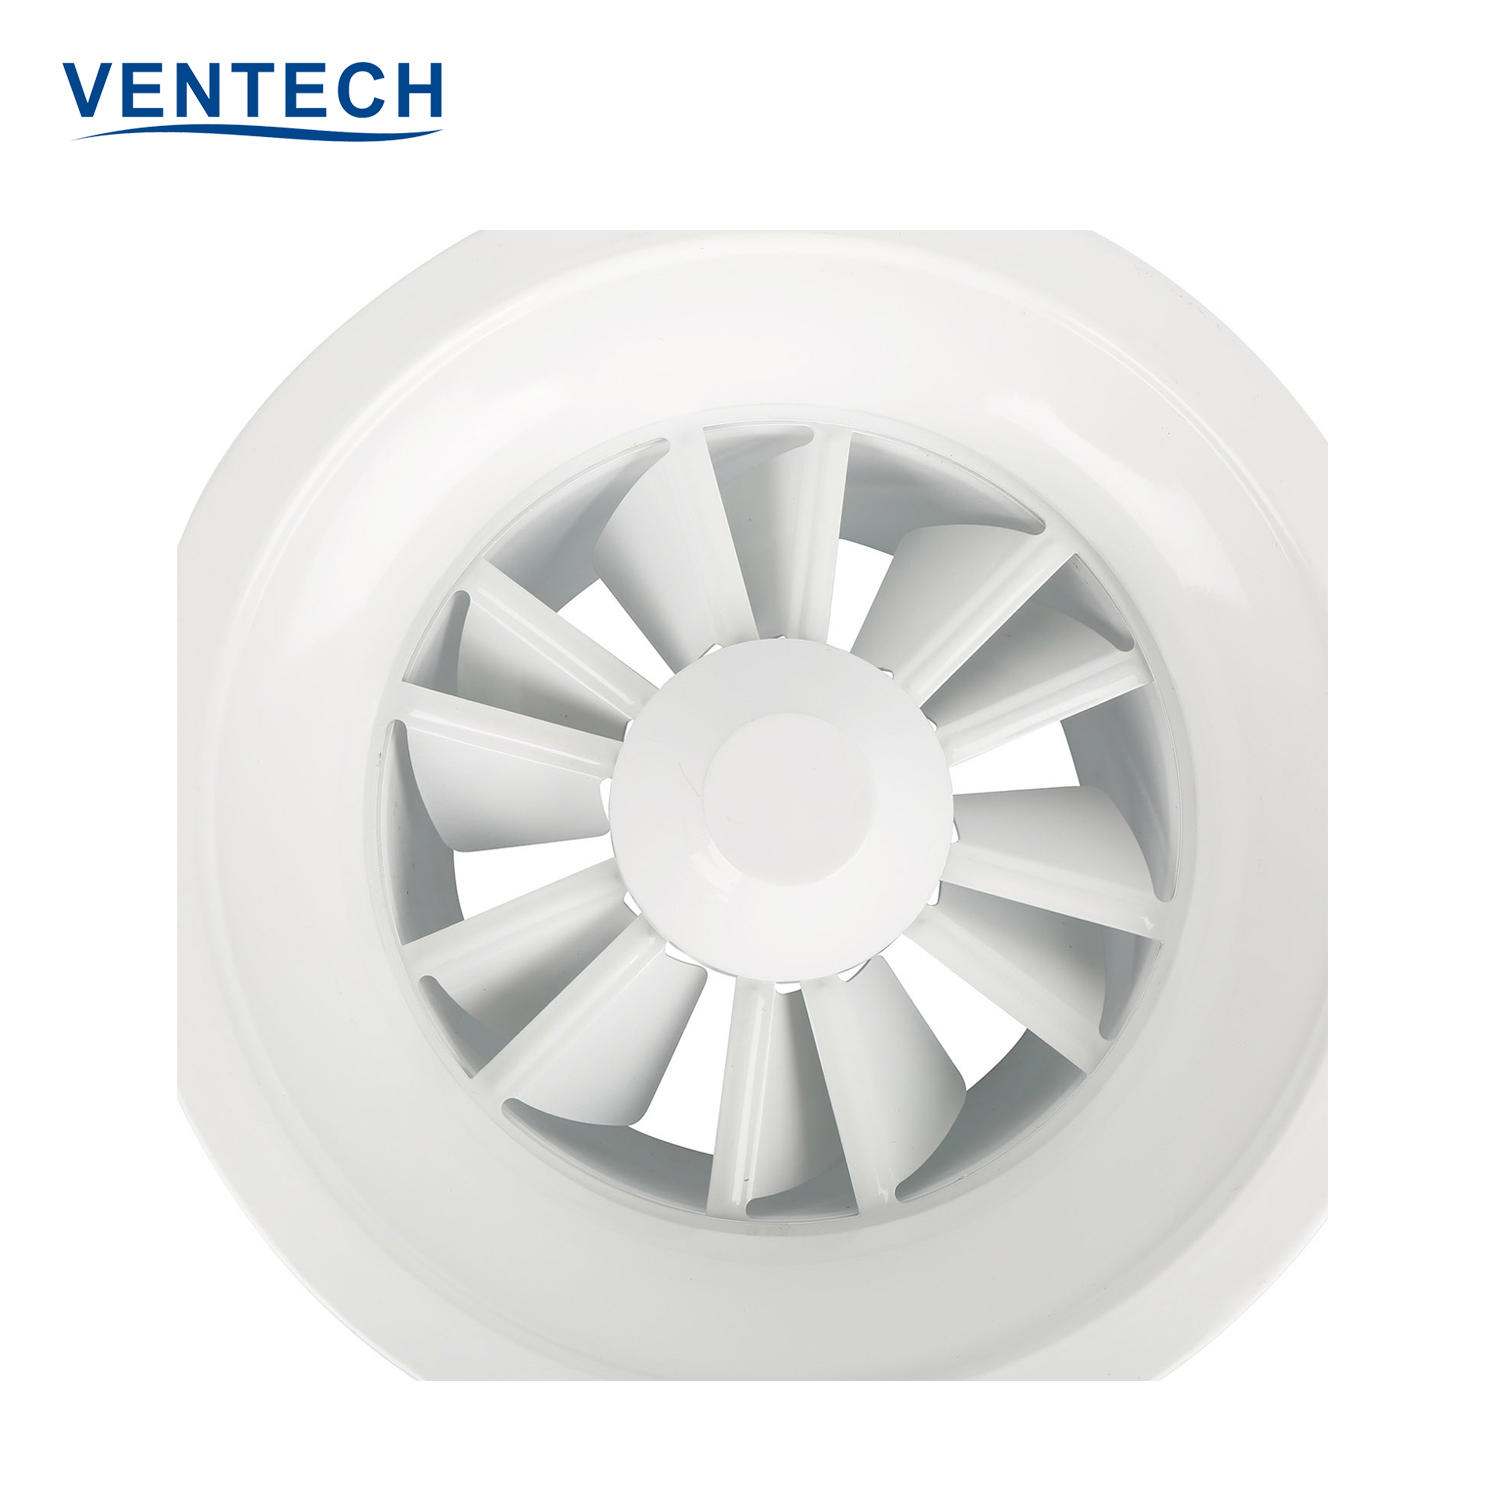 Ventech Hvac Round variable aluminum ceiling air outlet swirl diffuser